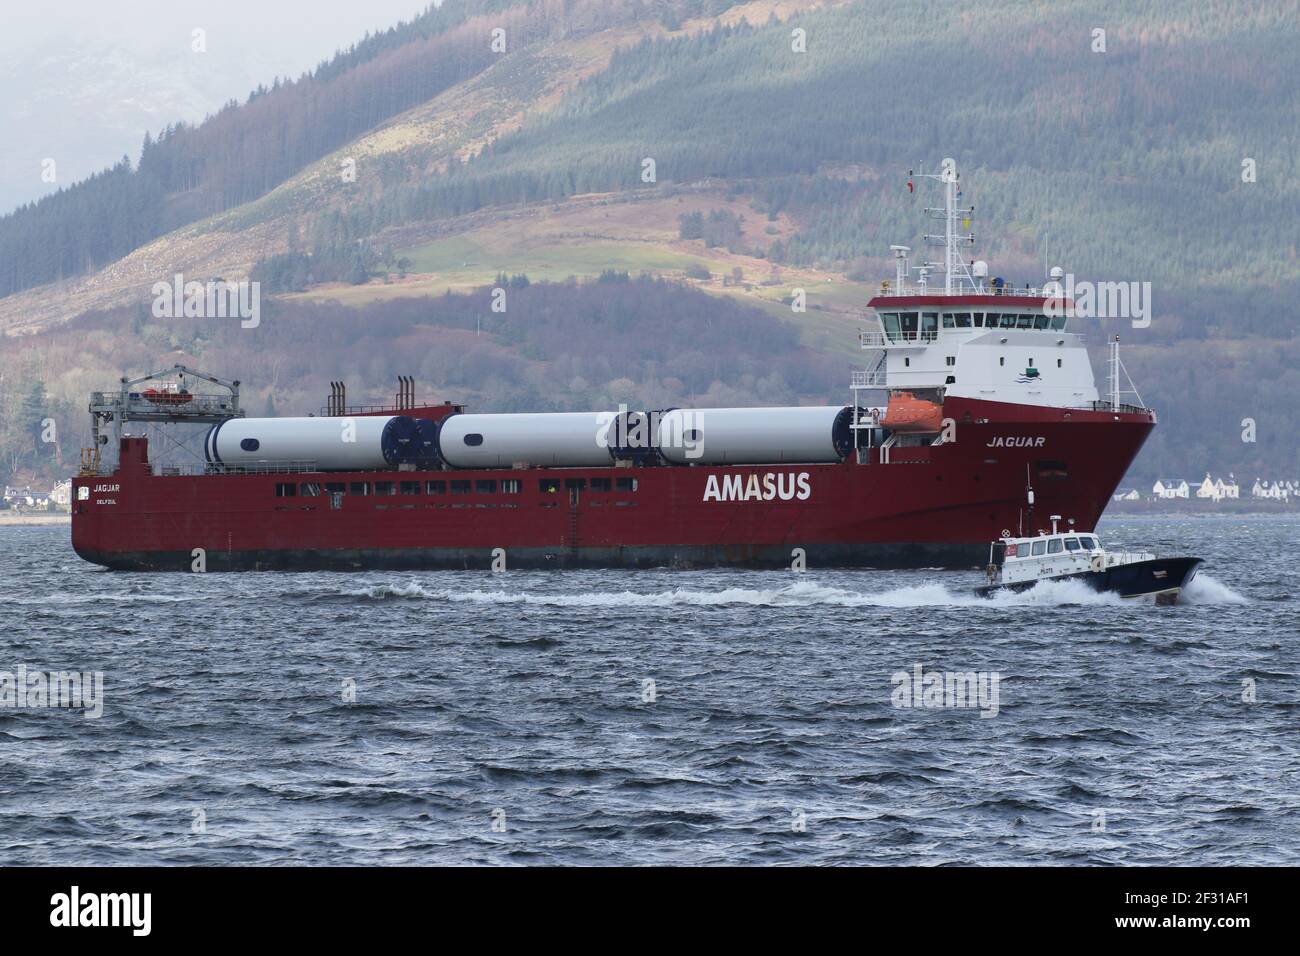 Jaguar, a general cargo vessel operated by Amasus Shipping, with the Clydeport pilot boat Mount Stuart, passing Gourock on the Firth of Clyde. Stock Photo